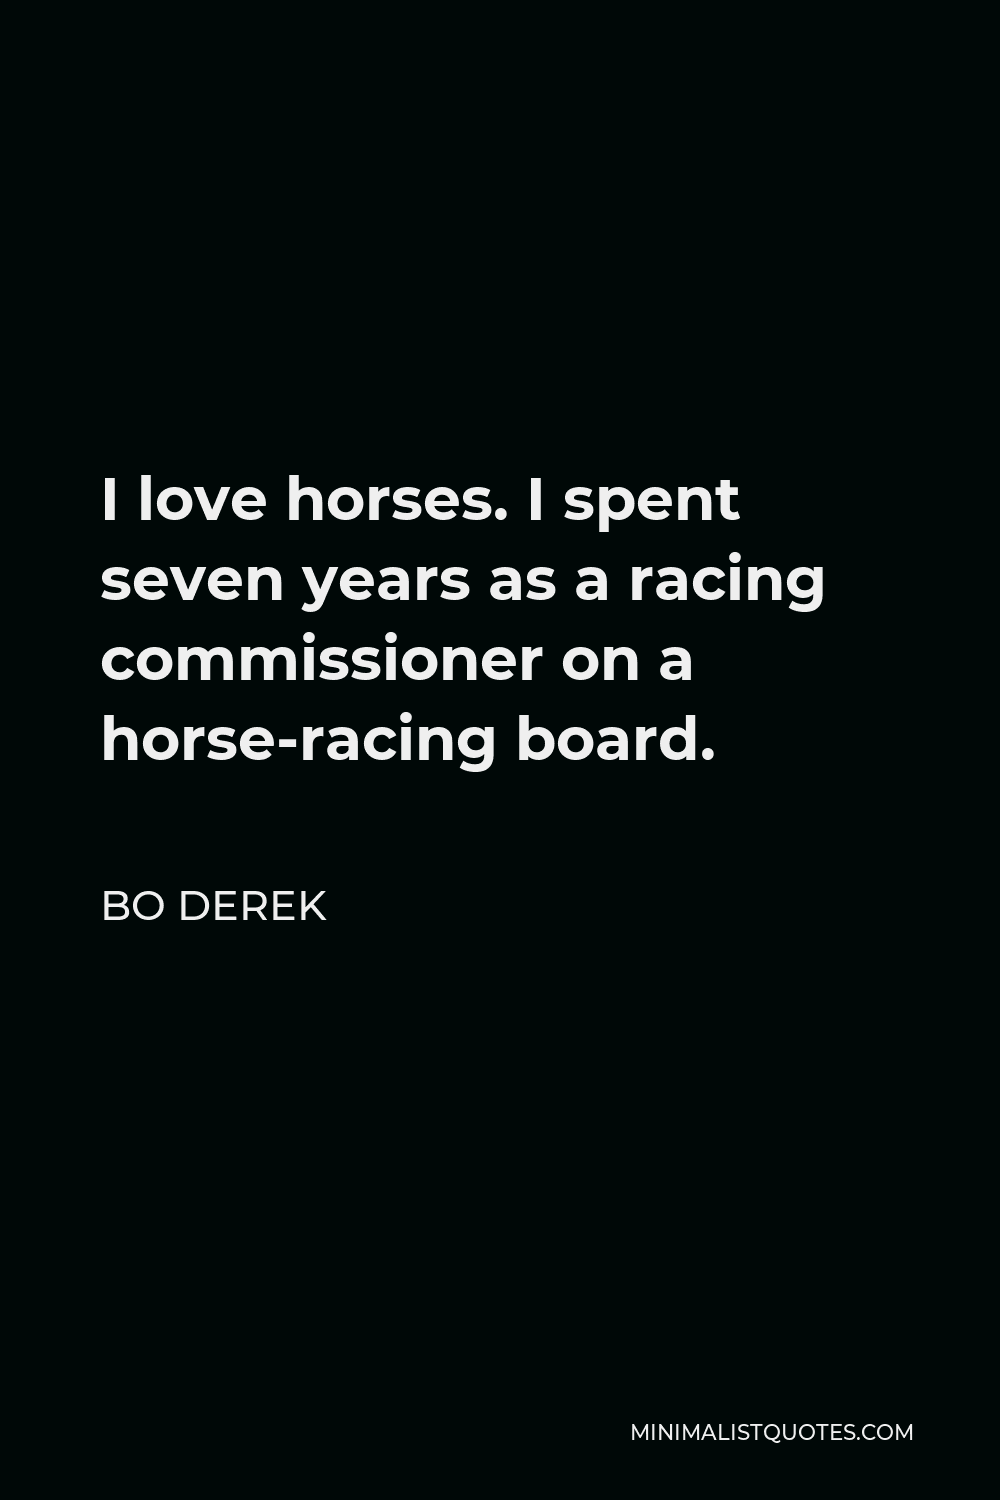 Bo Derek Quote - I love horses. I spent seven years as a racing commissioner on a horse-racing board.